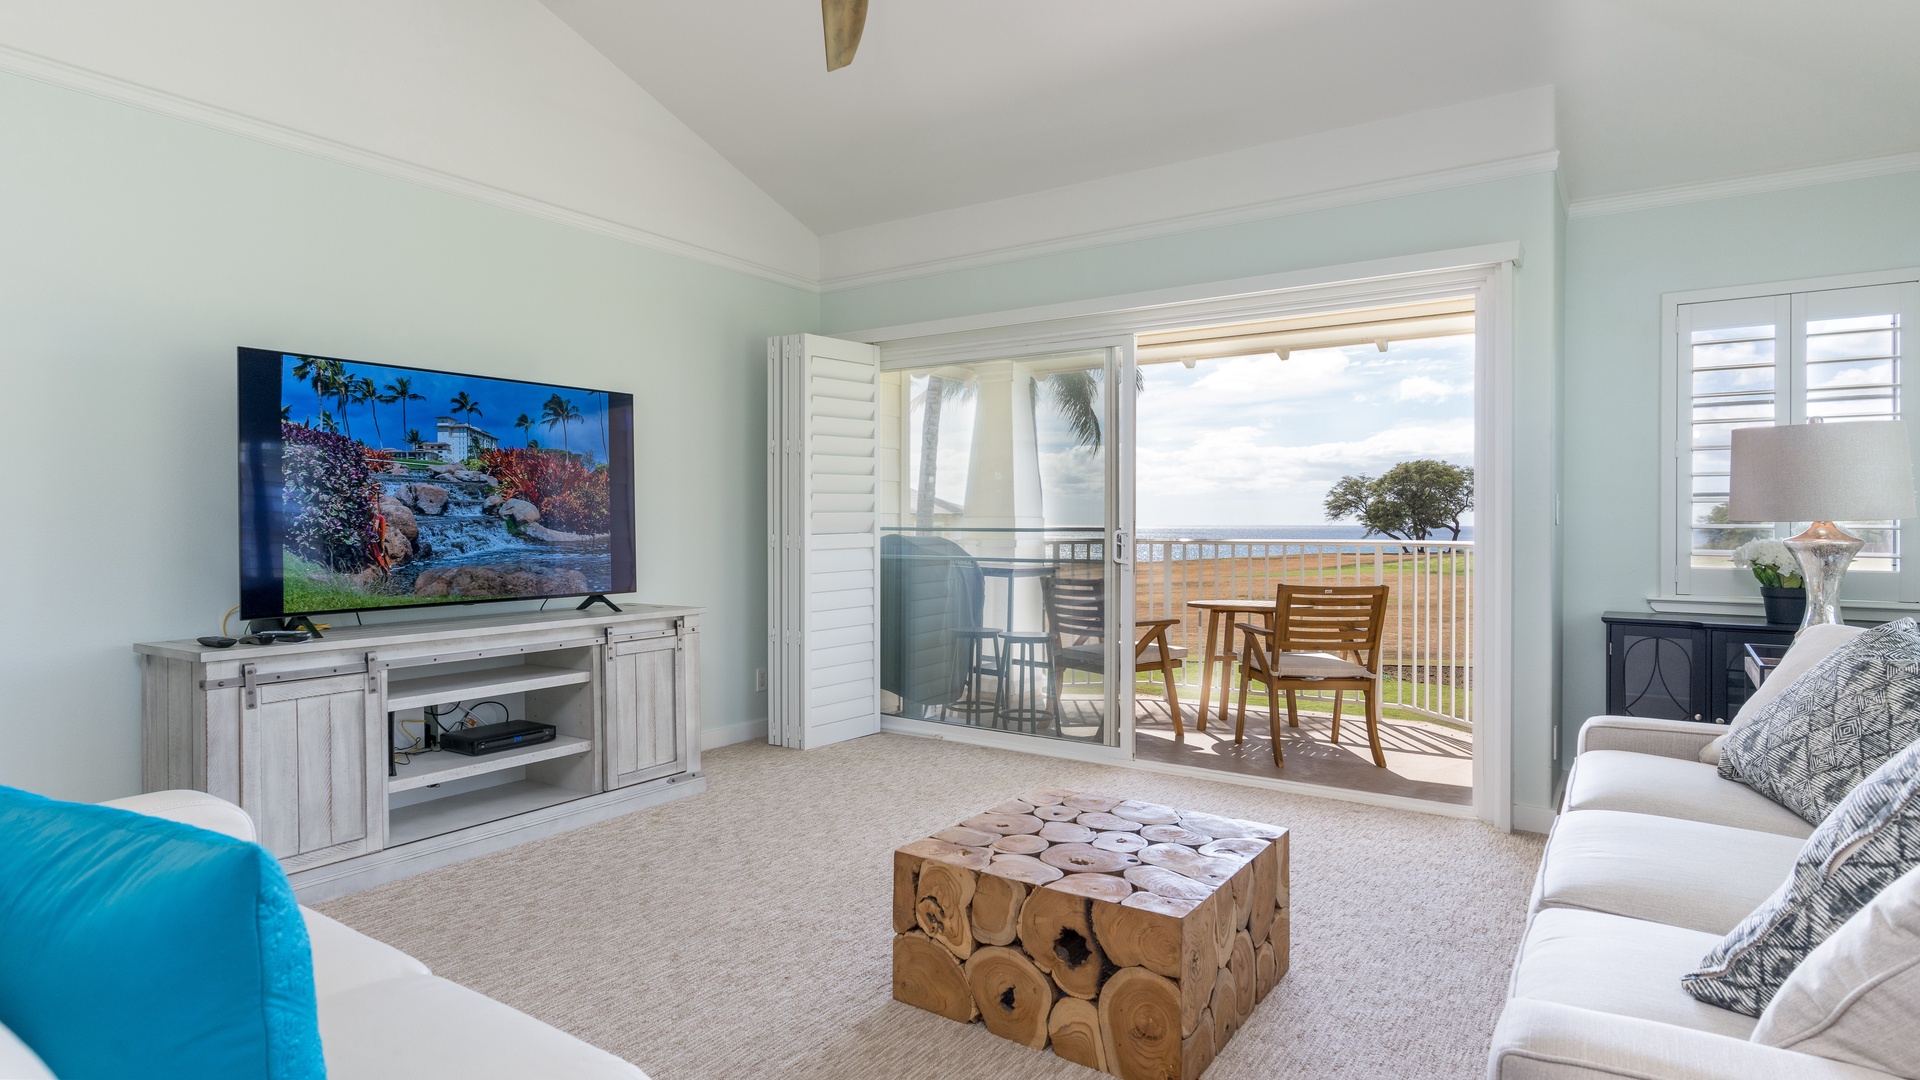 Kapolei Vacation Rentals, Kai Lani 21C - Enjoy reading in the scenic surroundings or cozy up for a movie night.